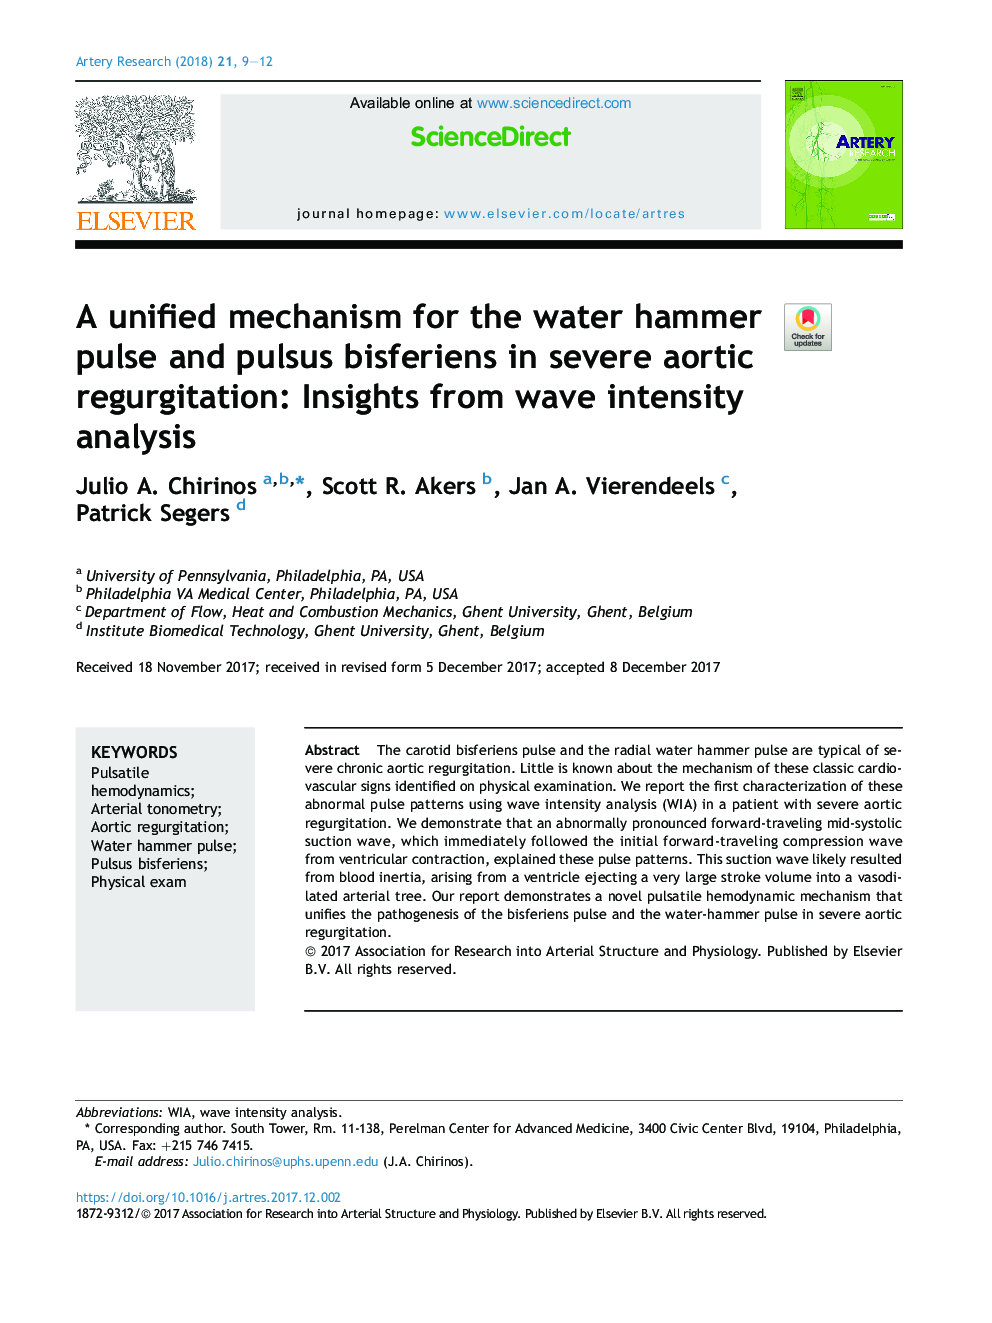 A unified mechanism for the water hammer pulse and pulsus bisferiens in severe aortic regurgitation: Insights from wave intensity analysis